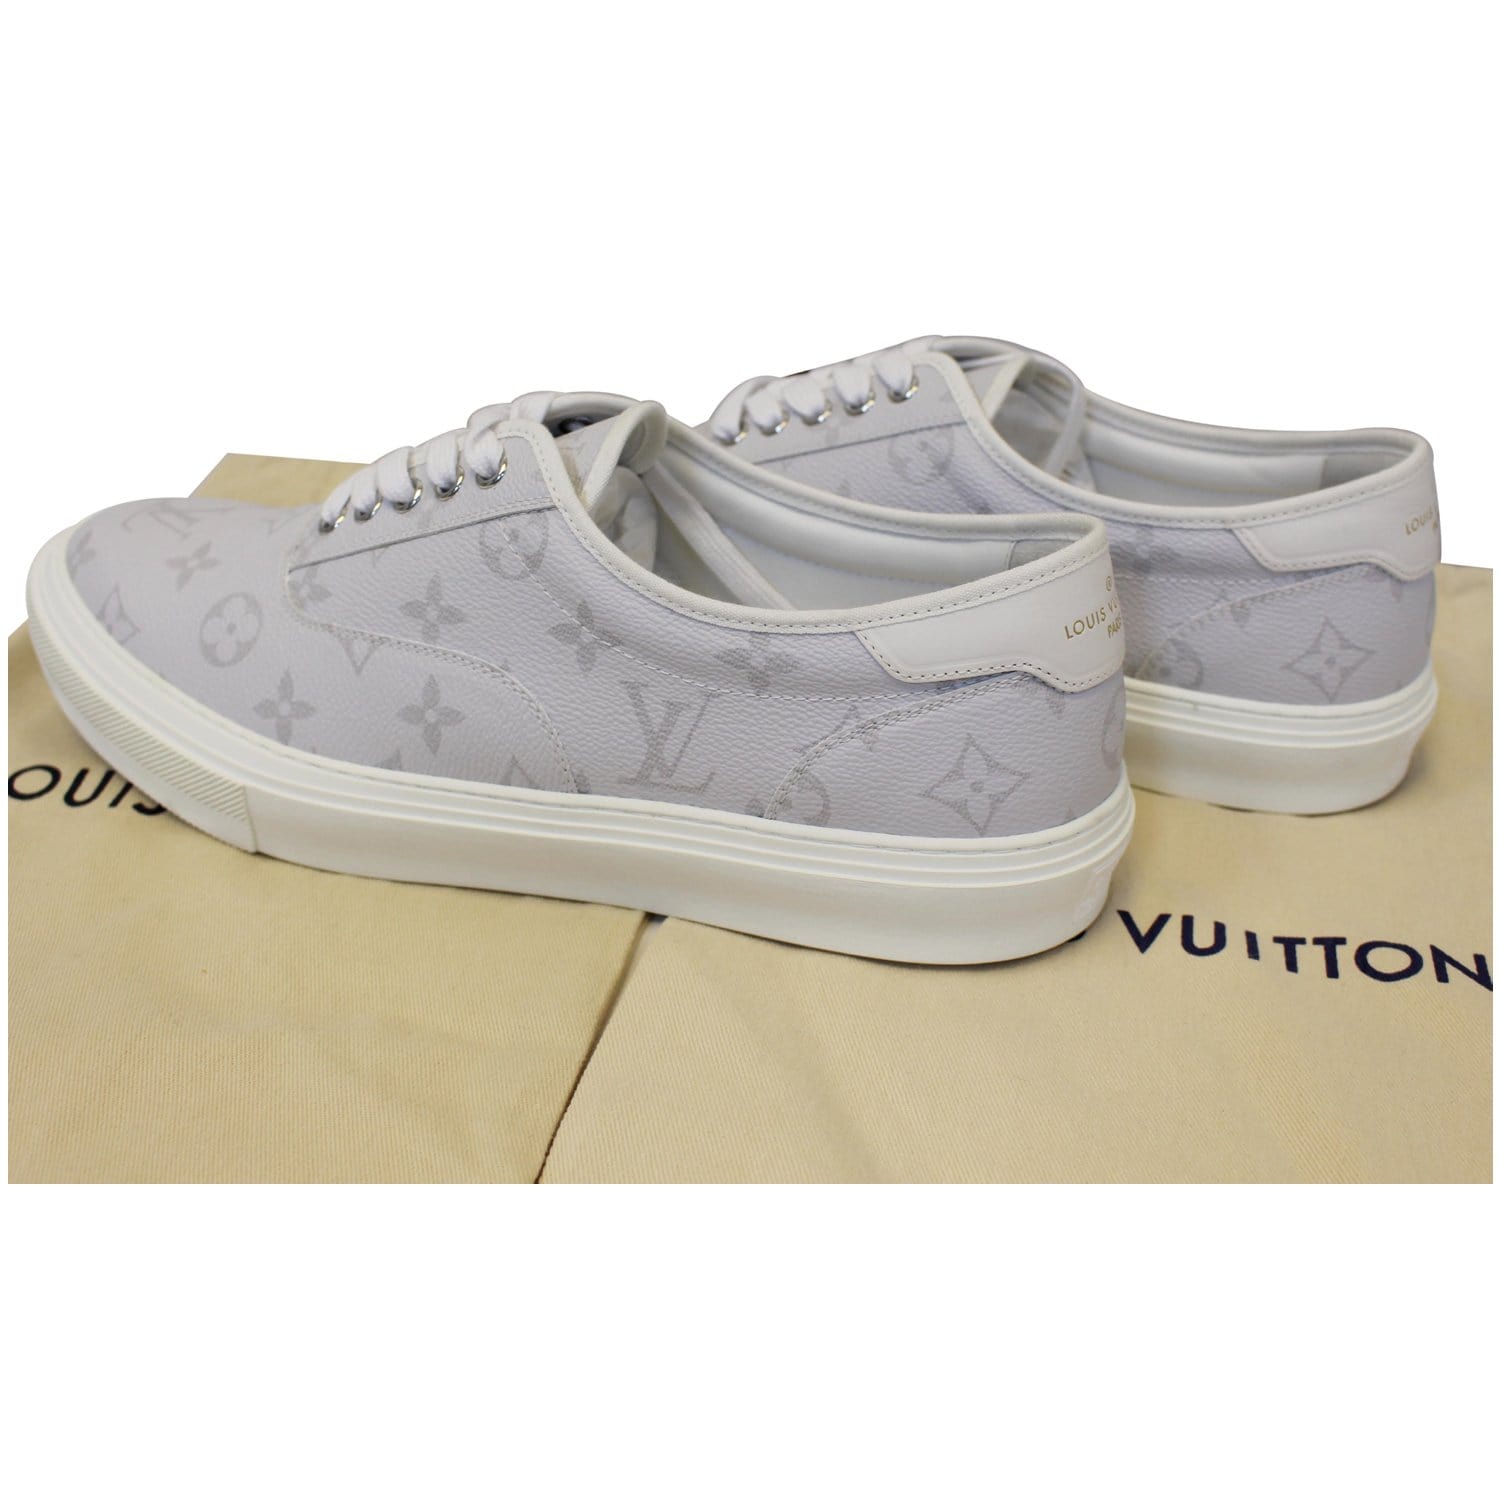 DS Louis Vuitton Trocadero sneakers for Sale in San Diego, CA - OfferUp